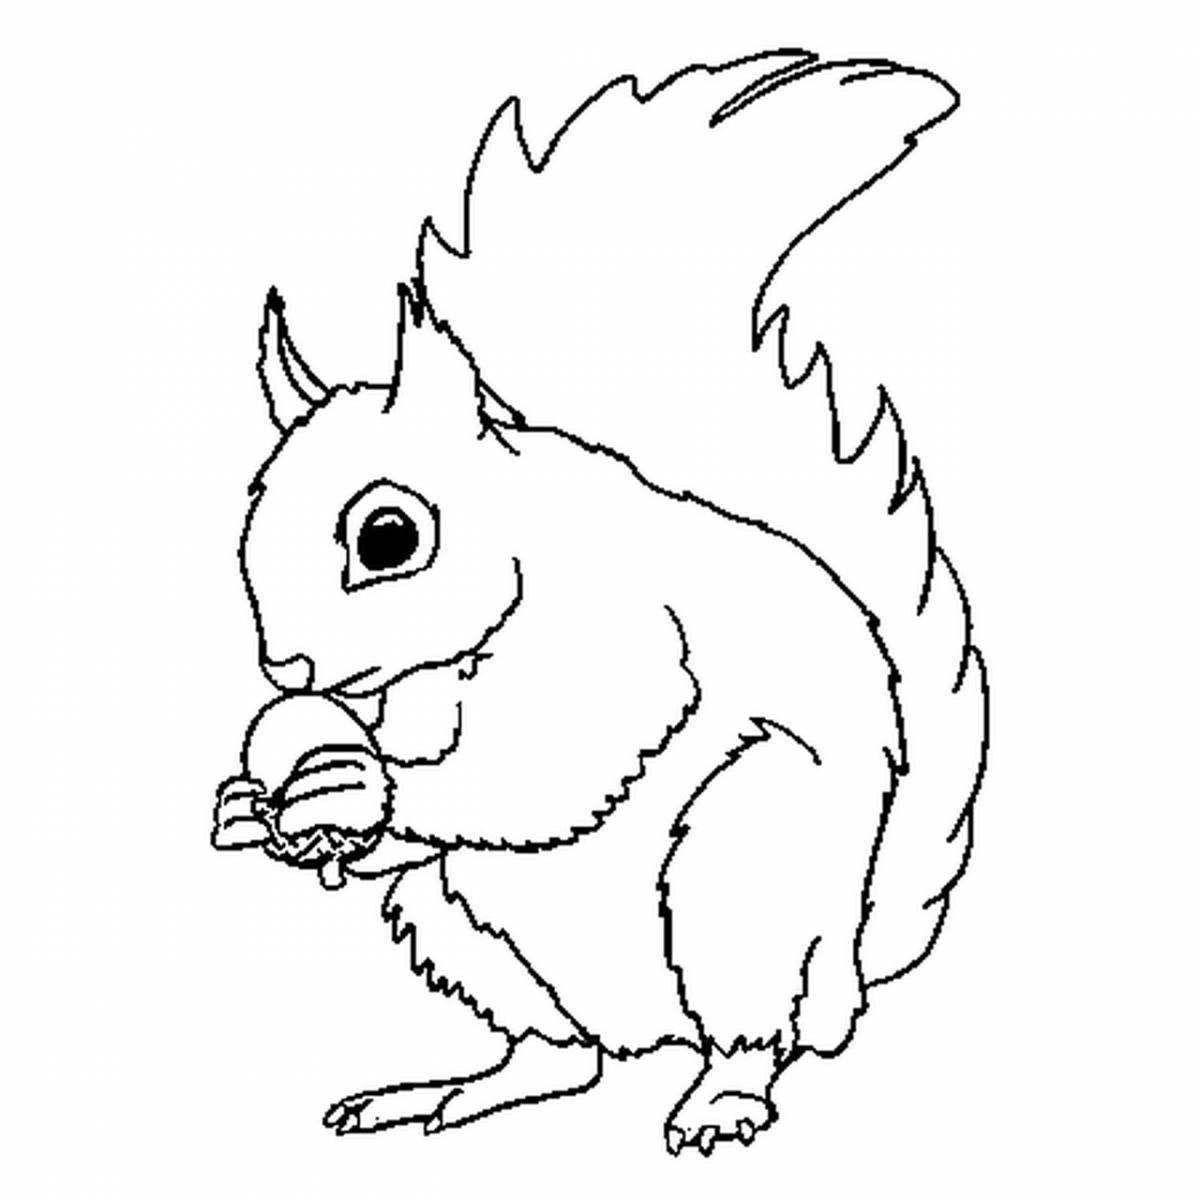 Witty squirrel with nuts coloring book